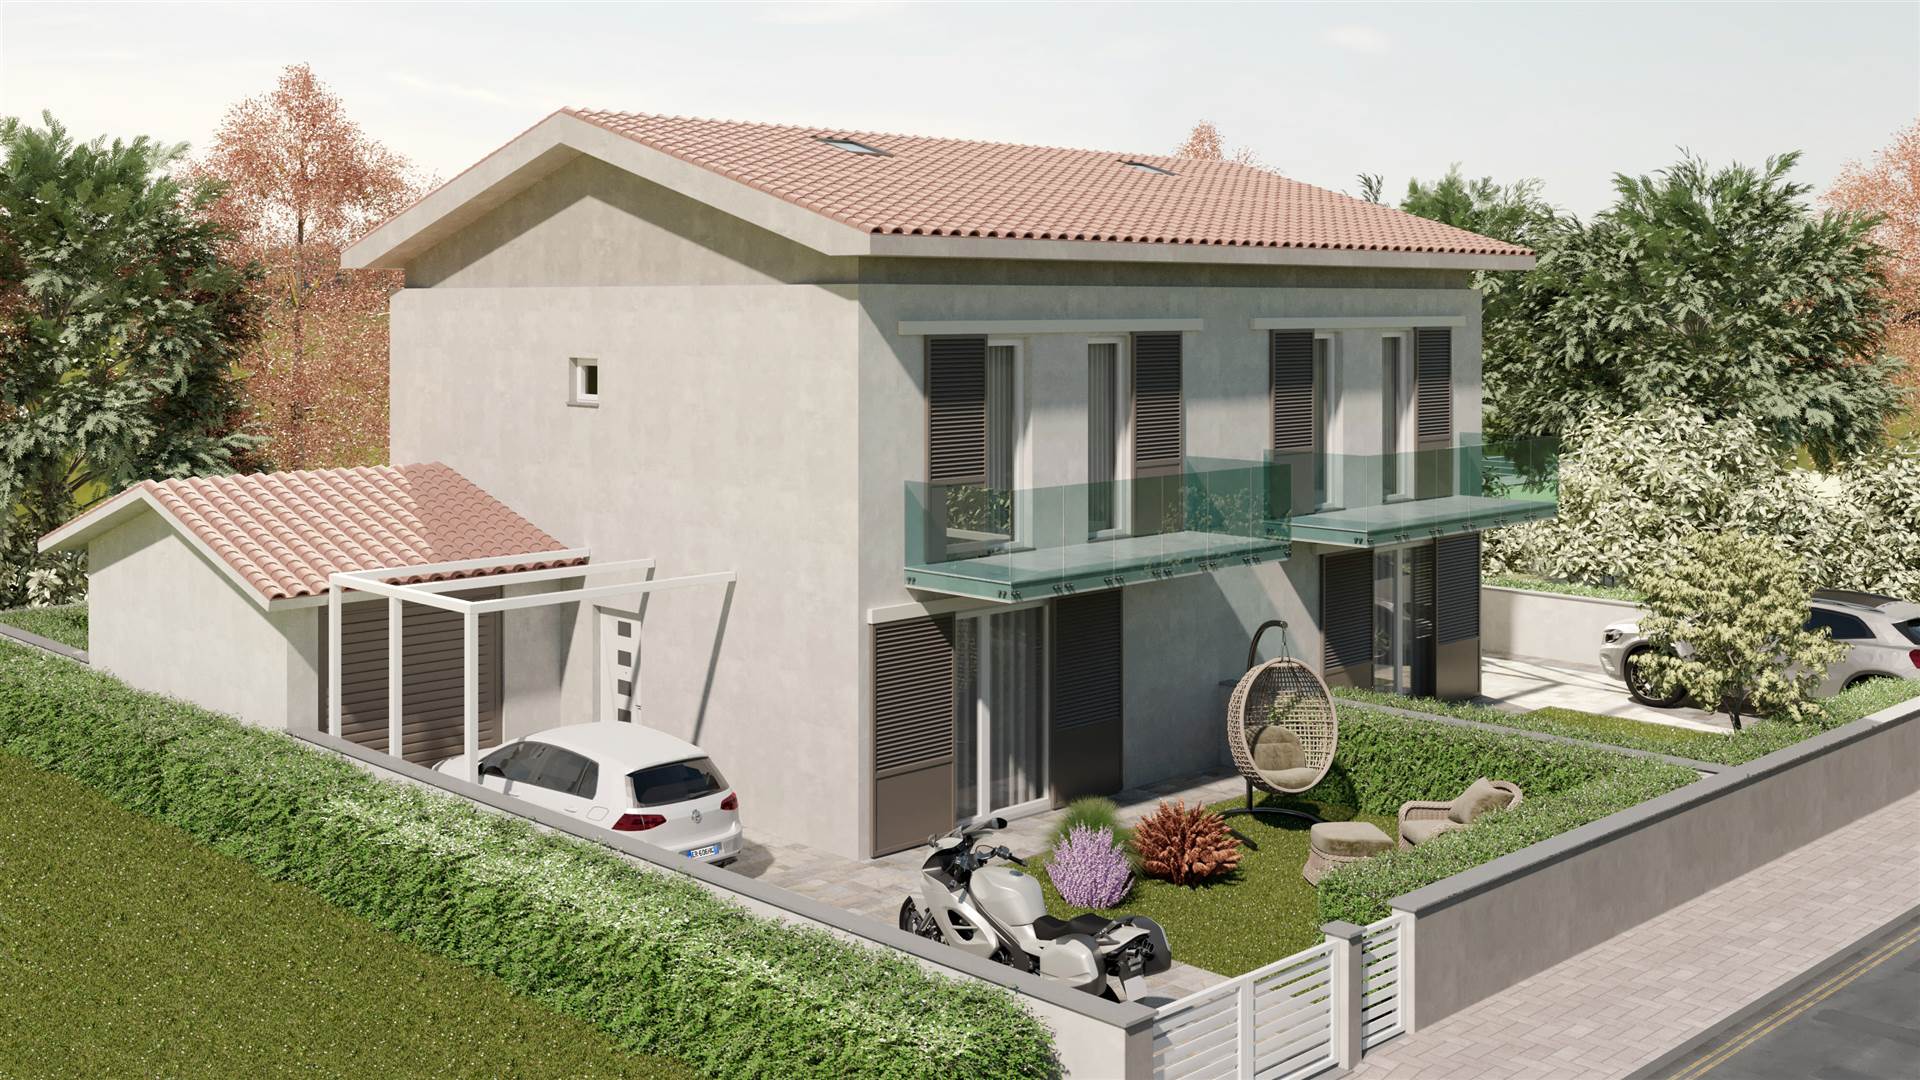 NAVACCHIO, CASCINA, Duplex villa for sale of 130 Sq. mt., Energetic class: A+, Epi: 100 kwh/m2 year, placed at Ground on 1, composed by: 5 Rooms, 